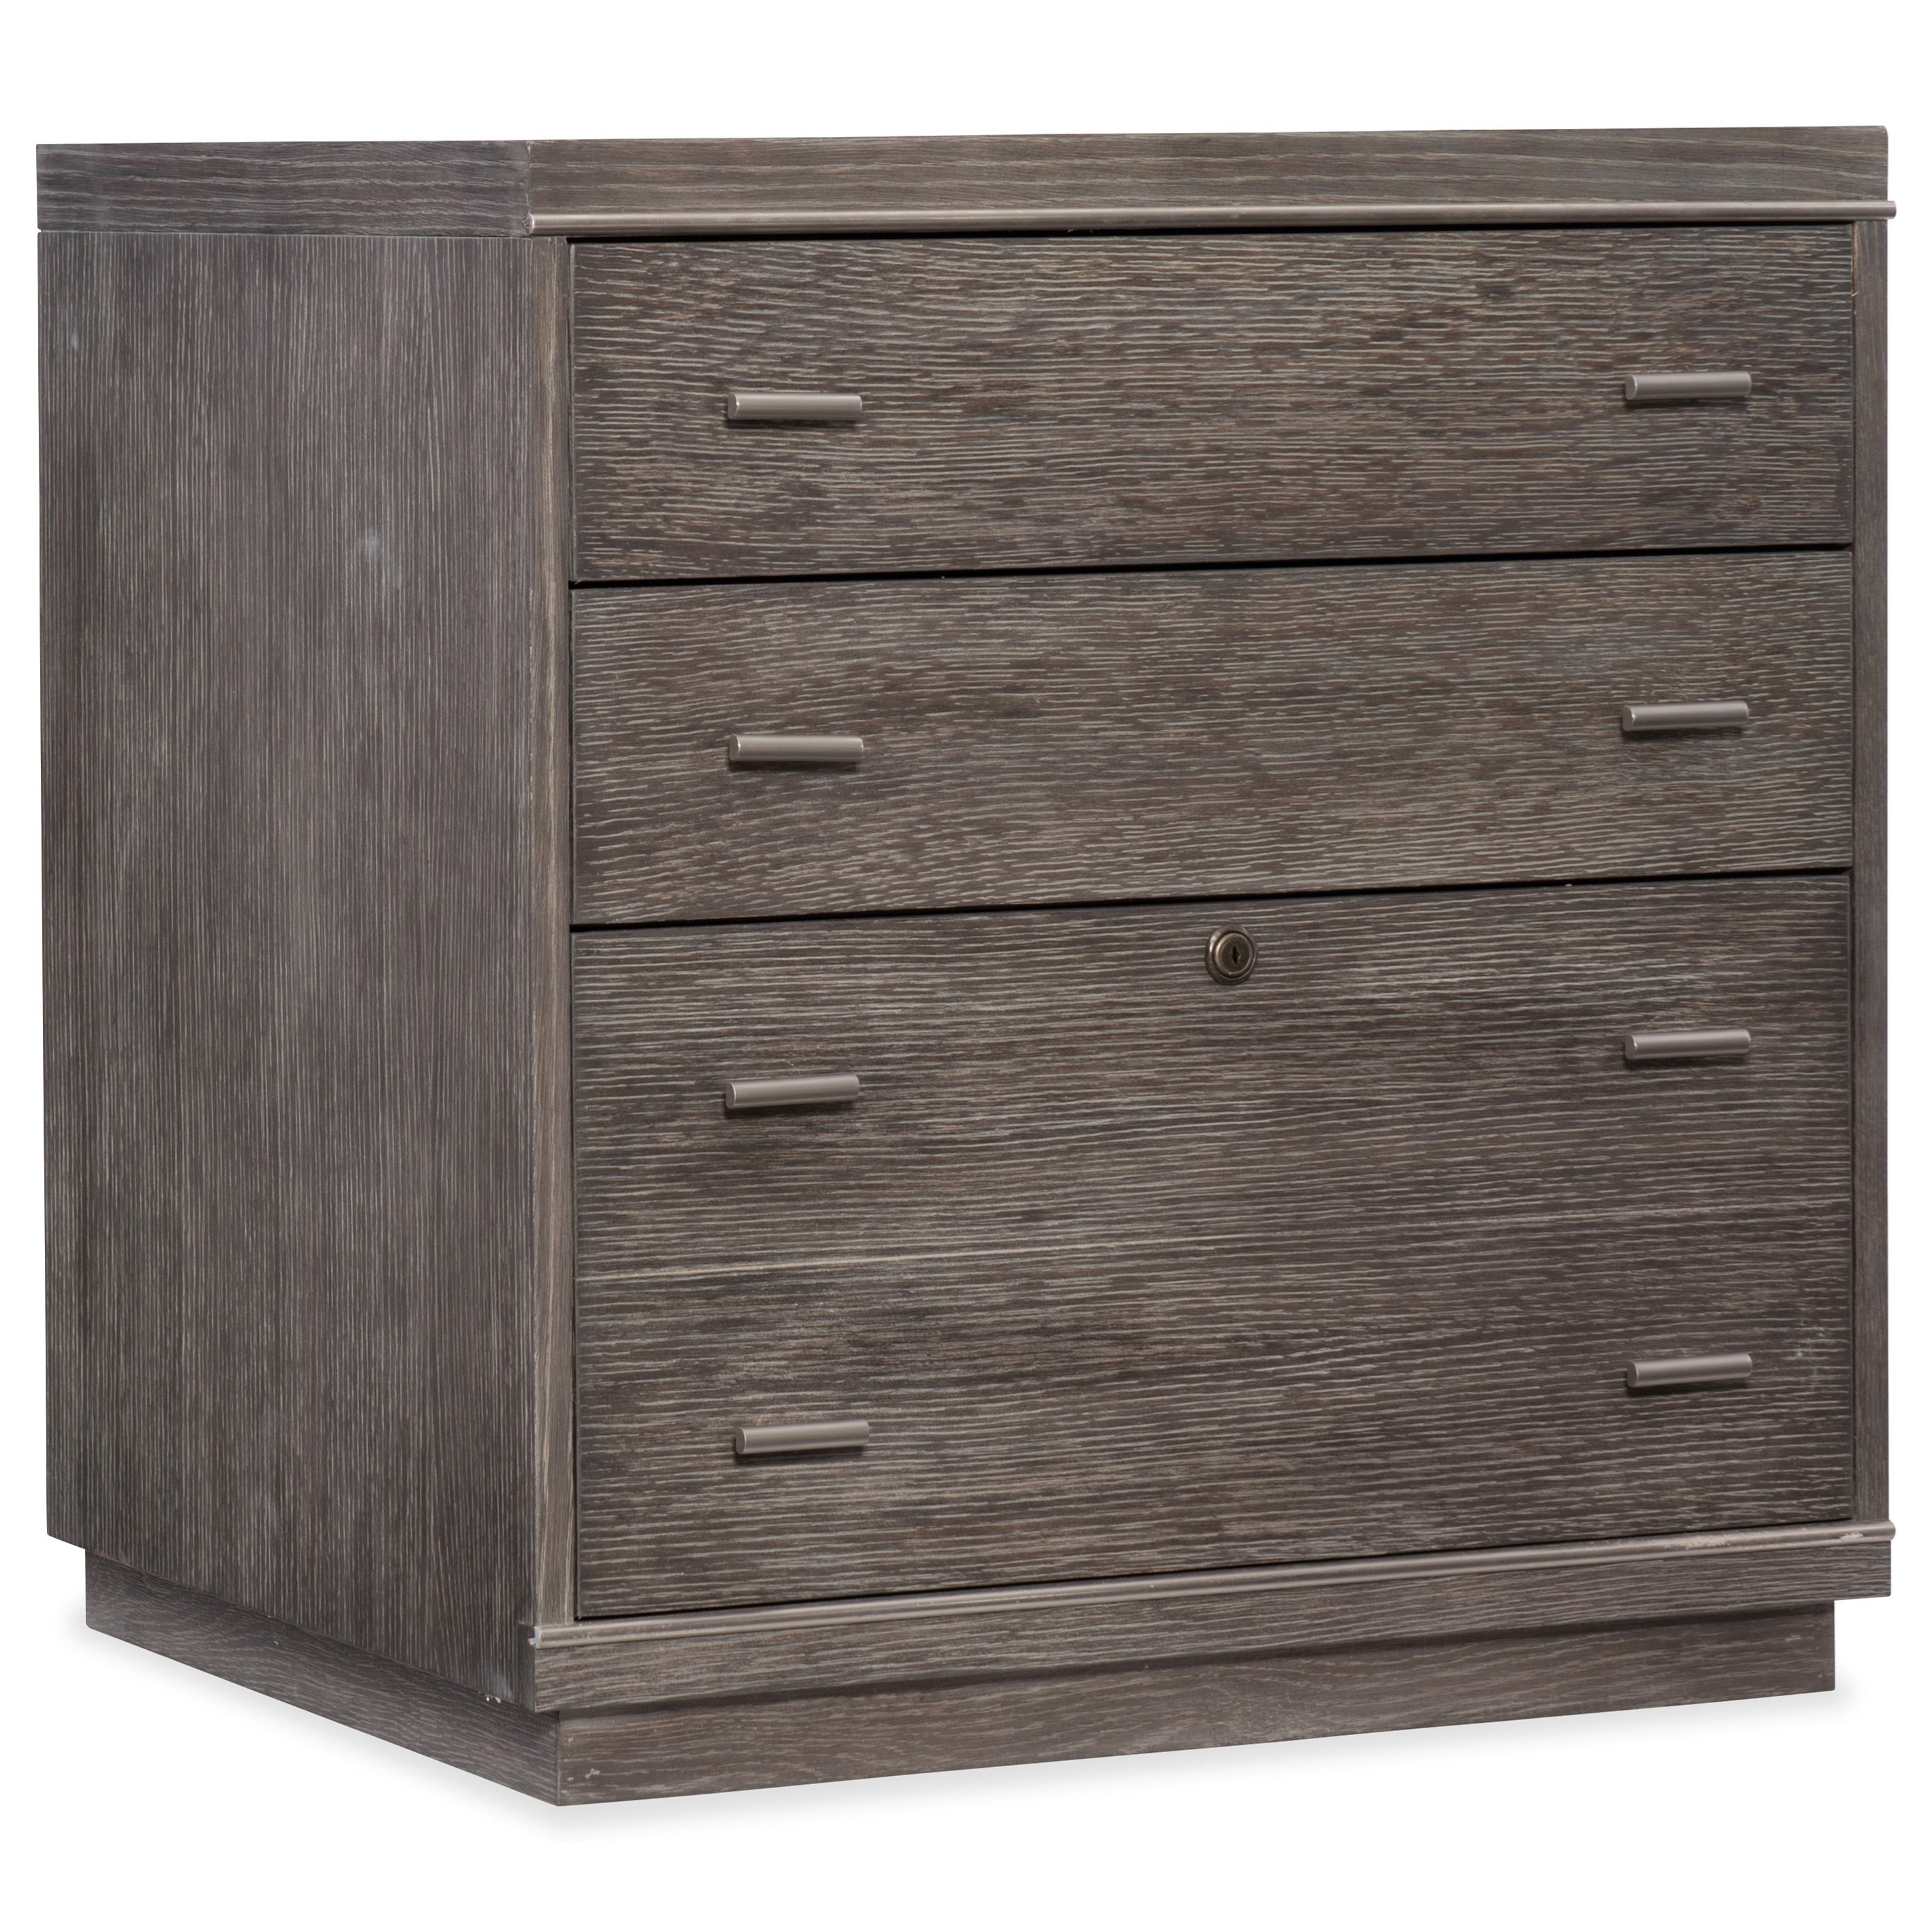 Hooker Furniture House Blend 1623 10466 Gry Lateral File Cabinet within proportions 2835 X 2835